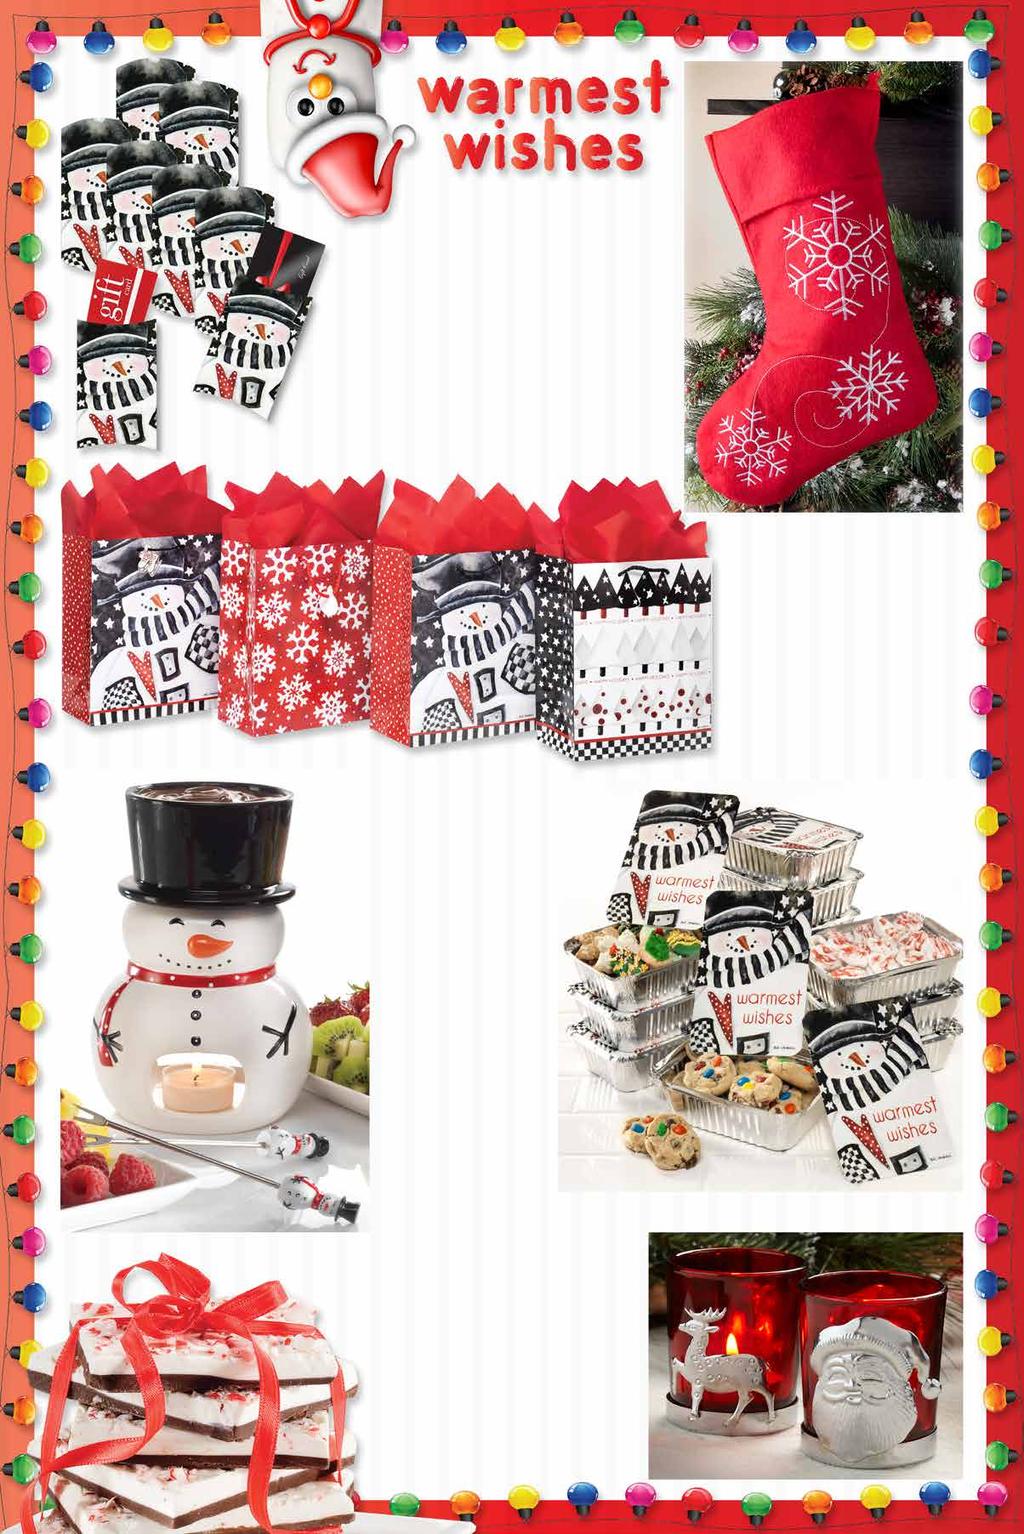 2 18 Long! 3220 $8.00 Snowmen Gift Card Holders - Set of 8 Billetera con Muñeco de Nieve - Juego de 8 These snowman gift card holders will make someone you love very happy this season.